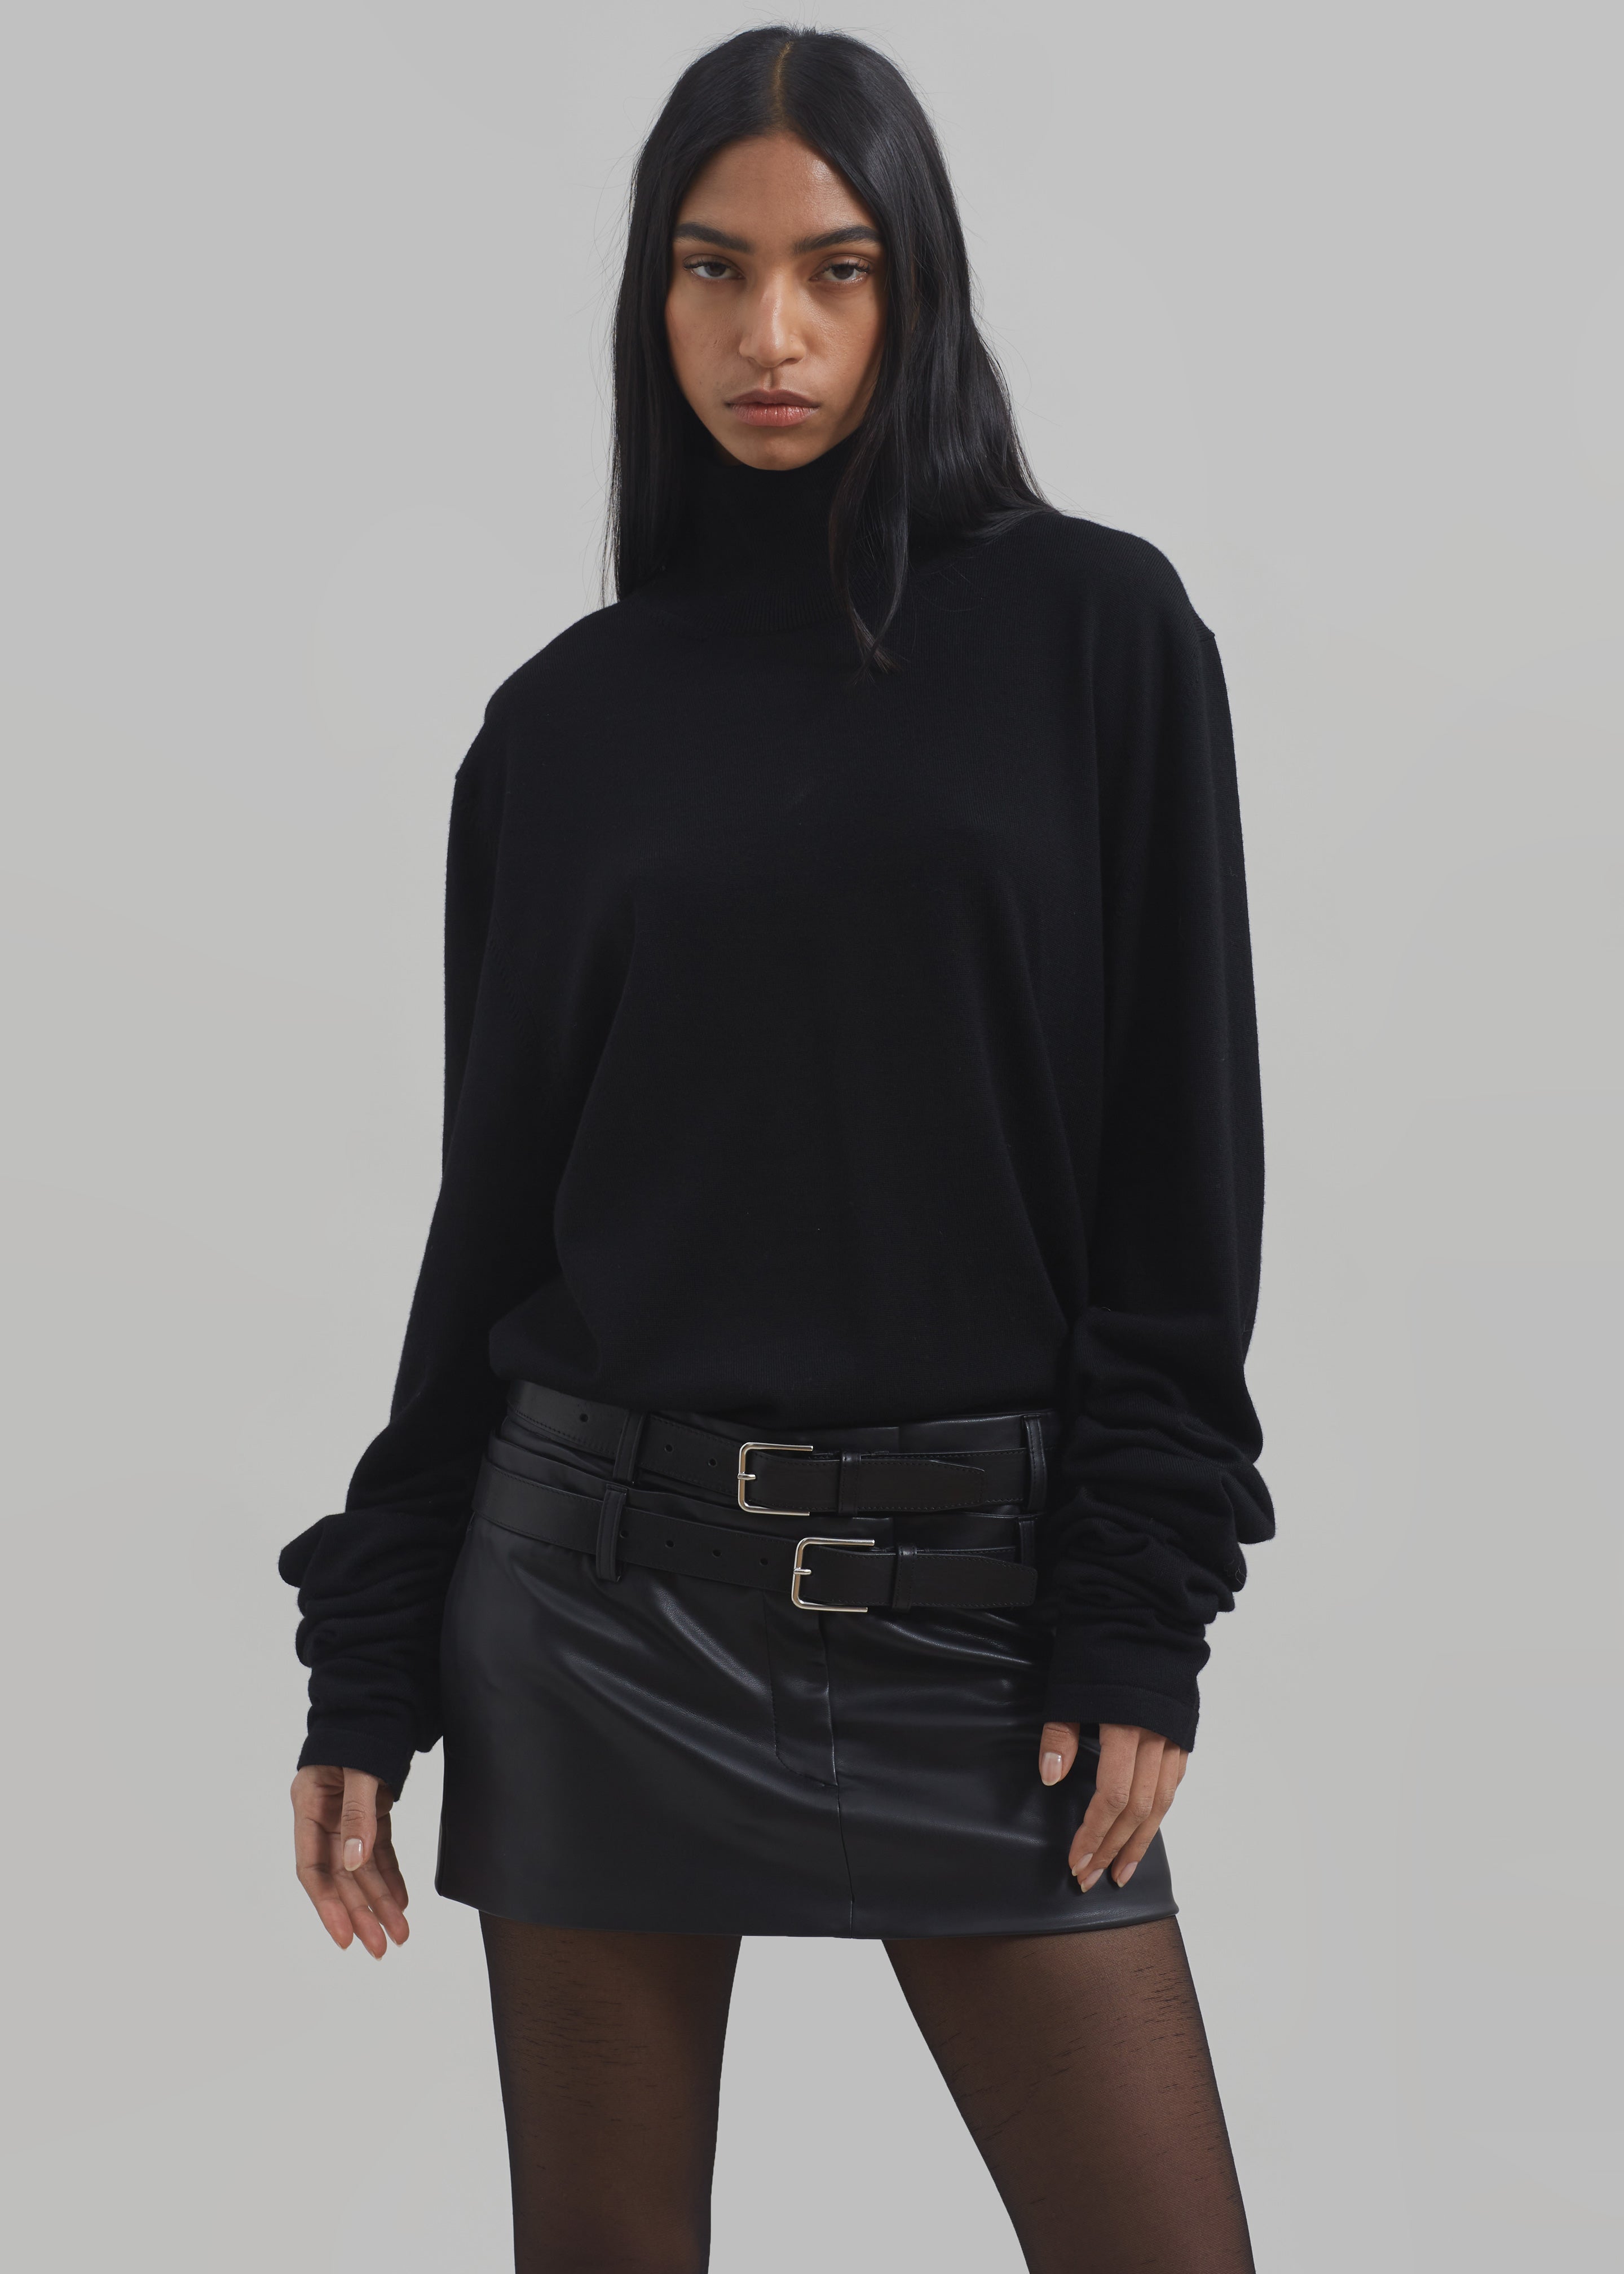 In The Name of Love Mini Skirt - Faux Leather Skirt in Black